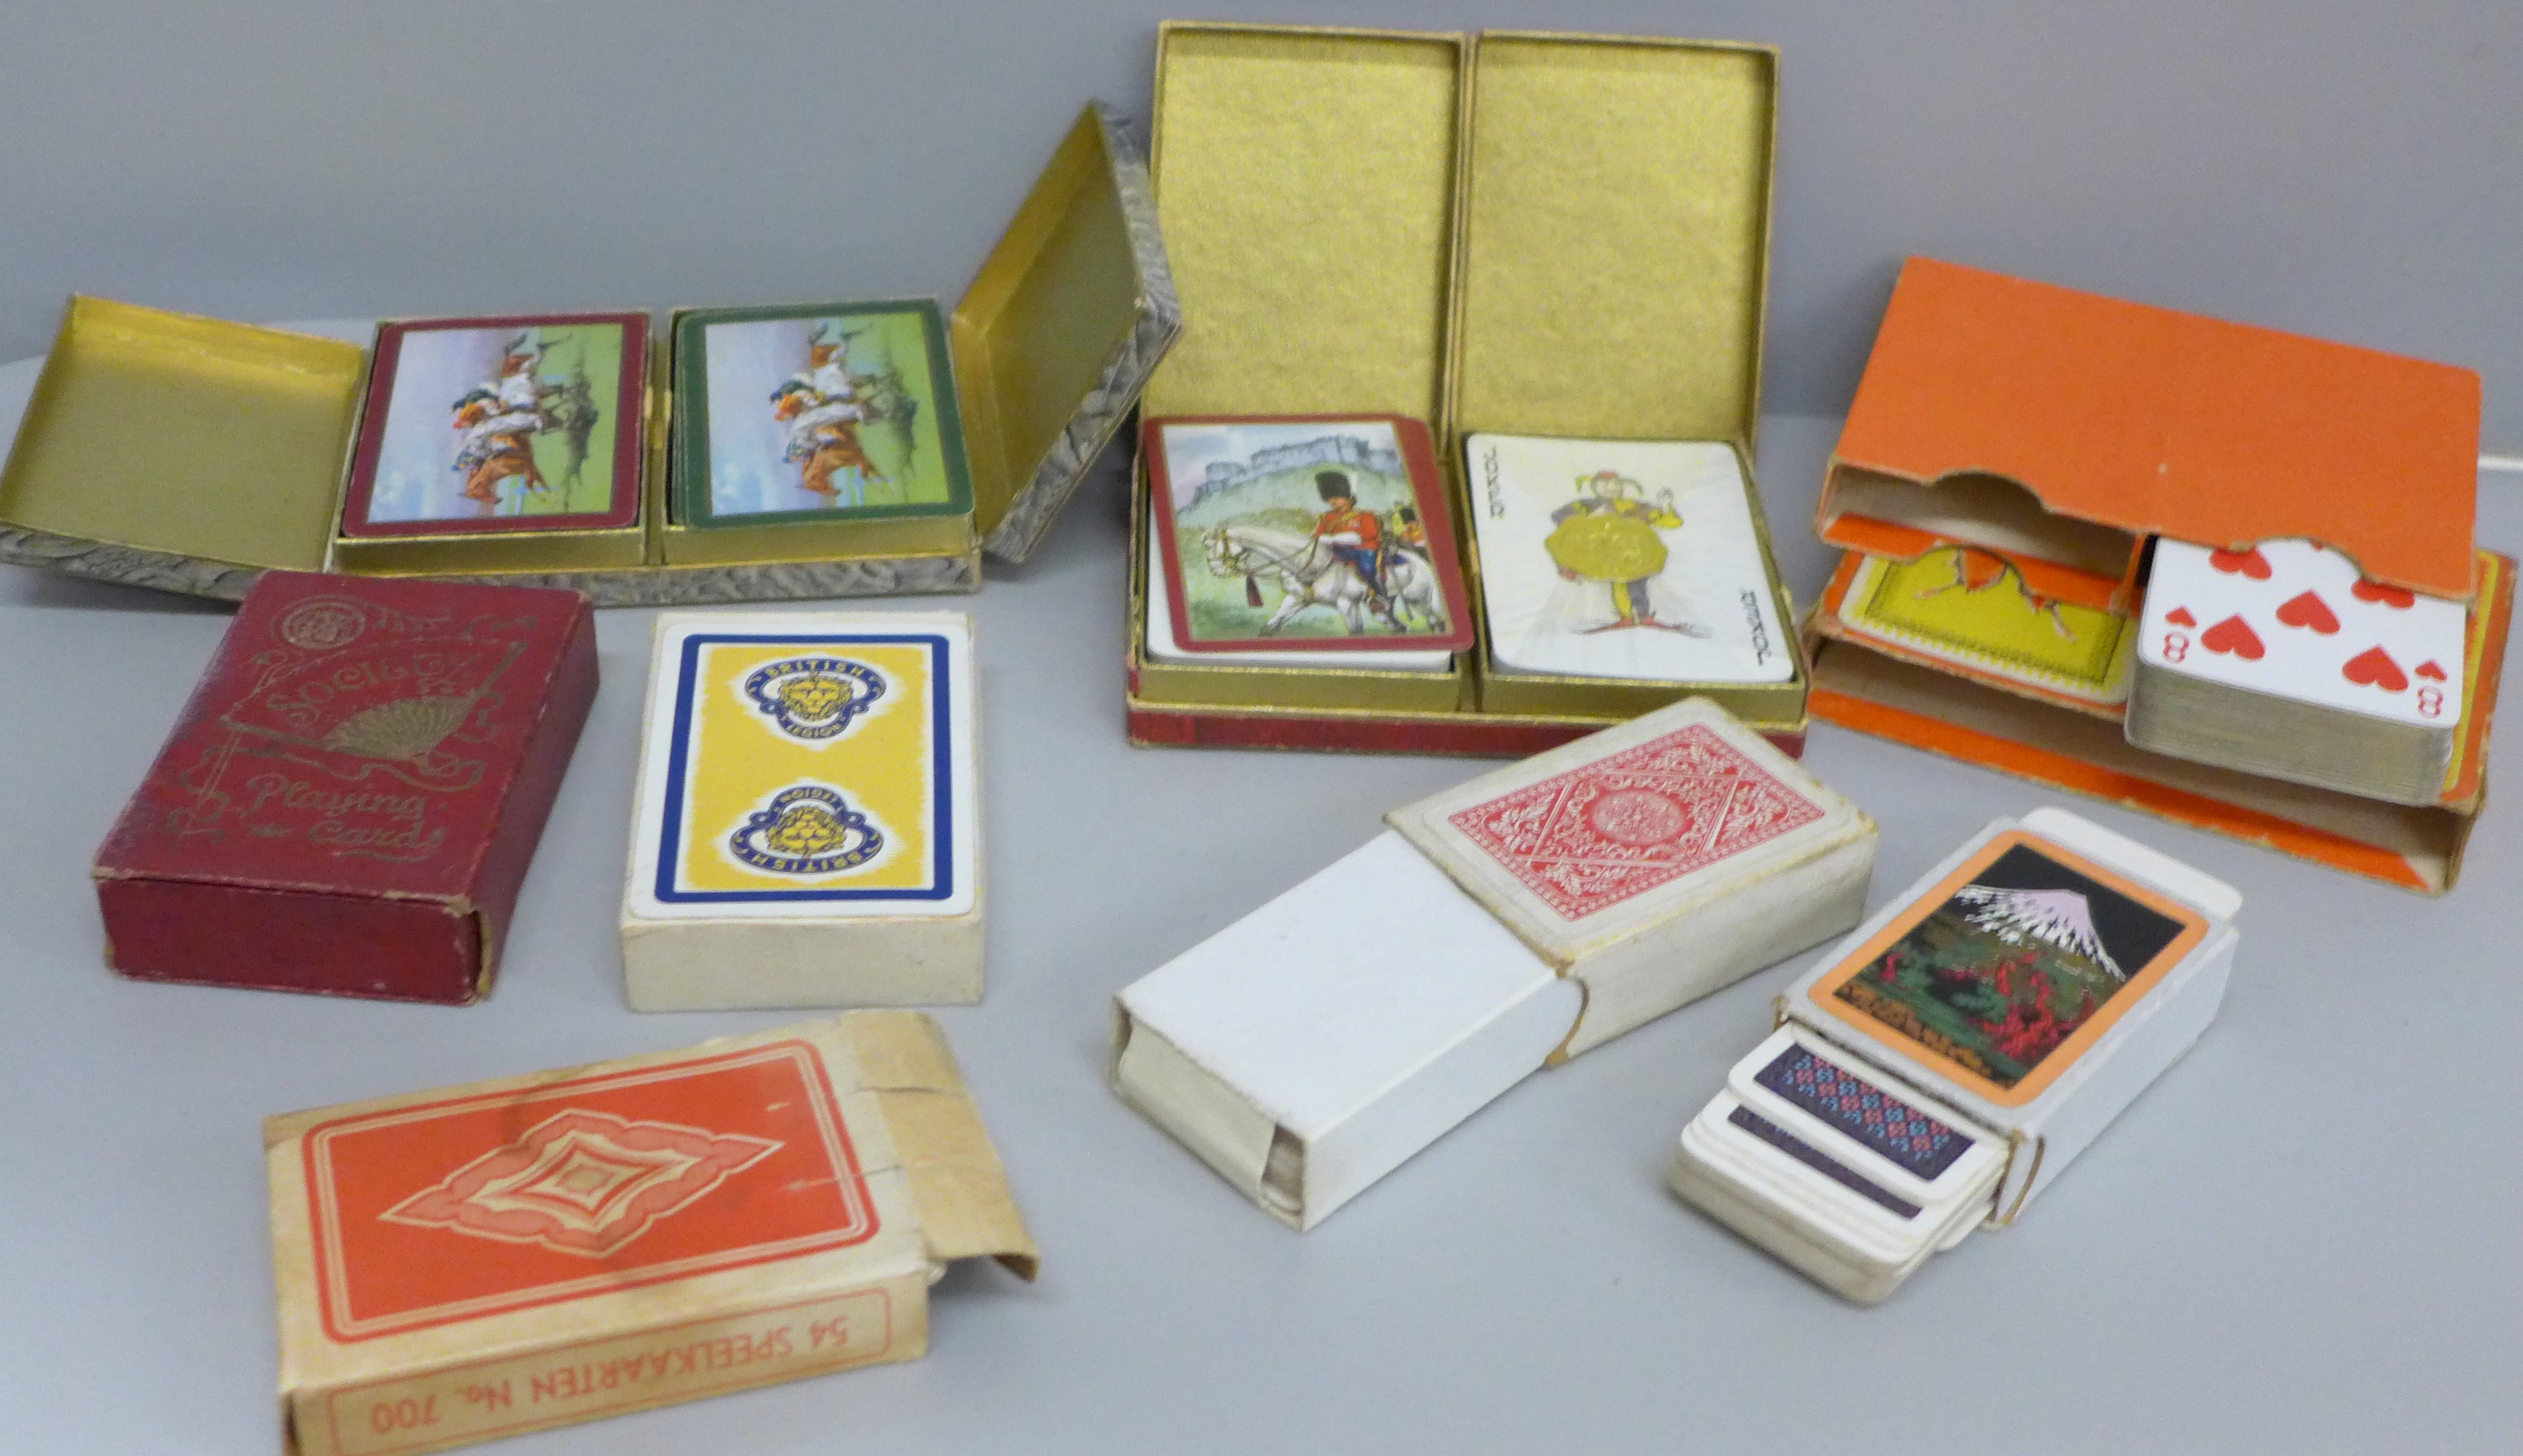 A collection of vintage playing cards